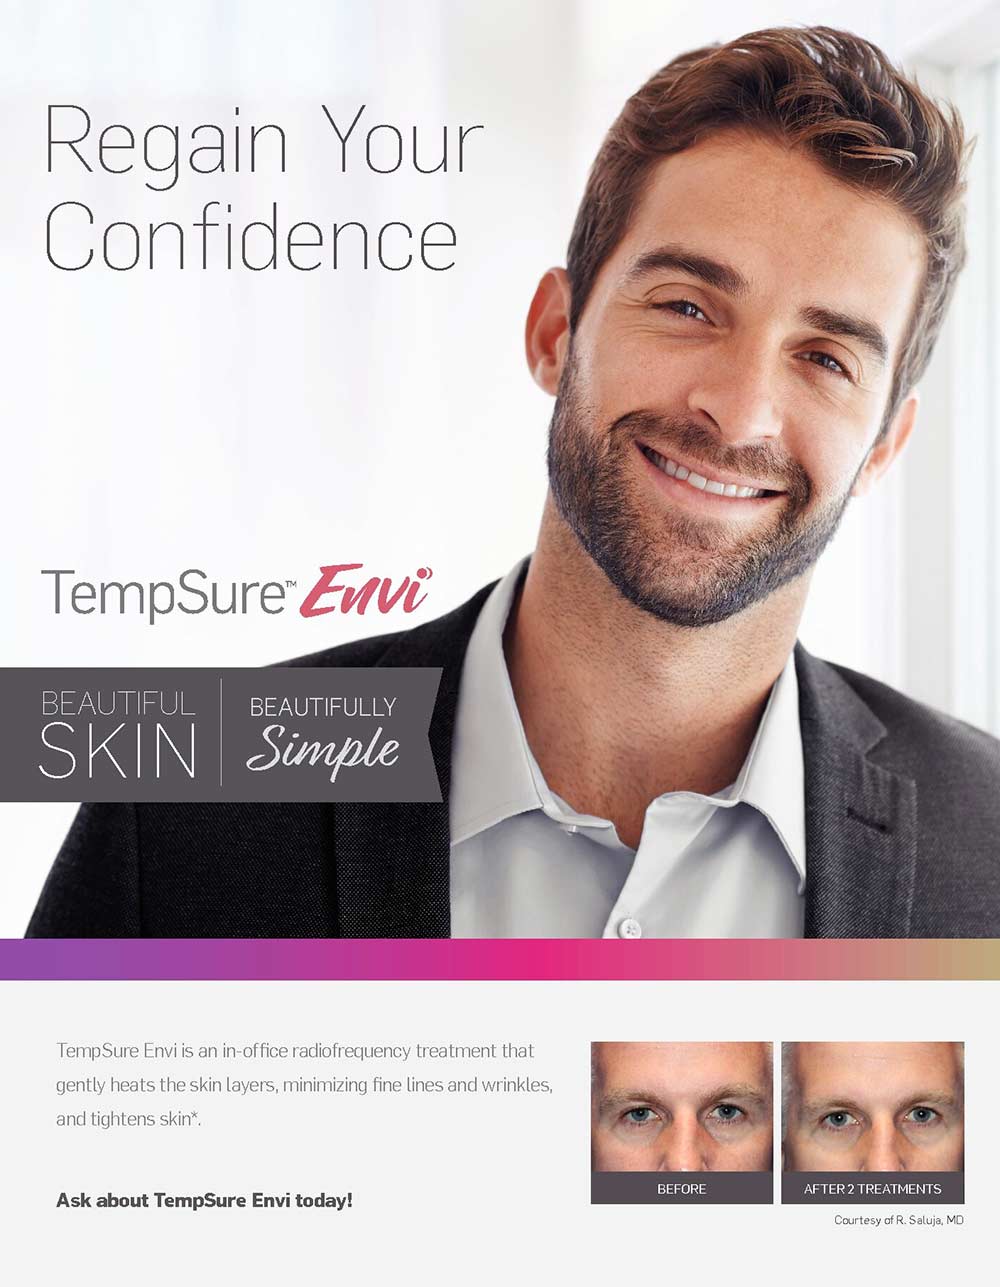 Tempsure Envi - Borchure information & results. If you are having trouble seeing this, please contact our office for assistance.